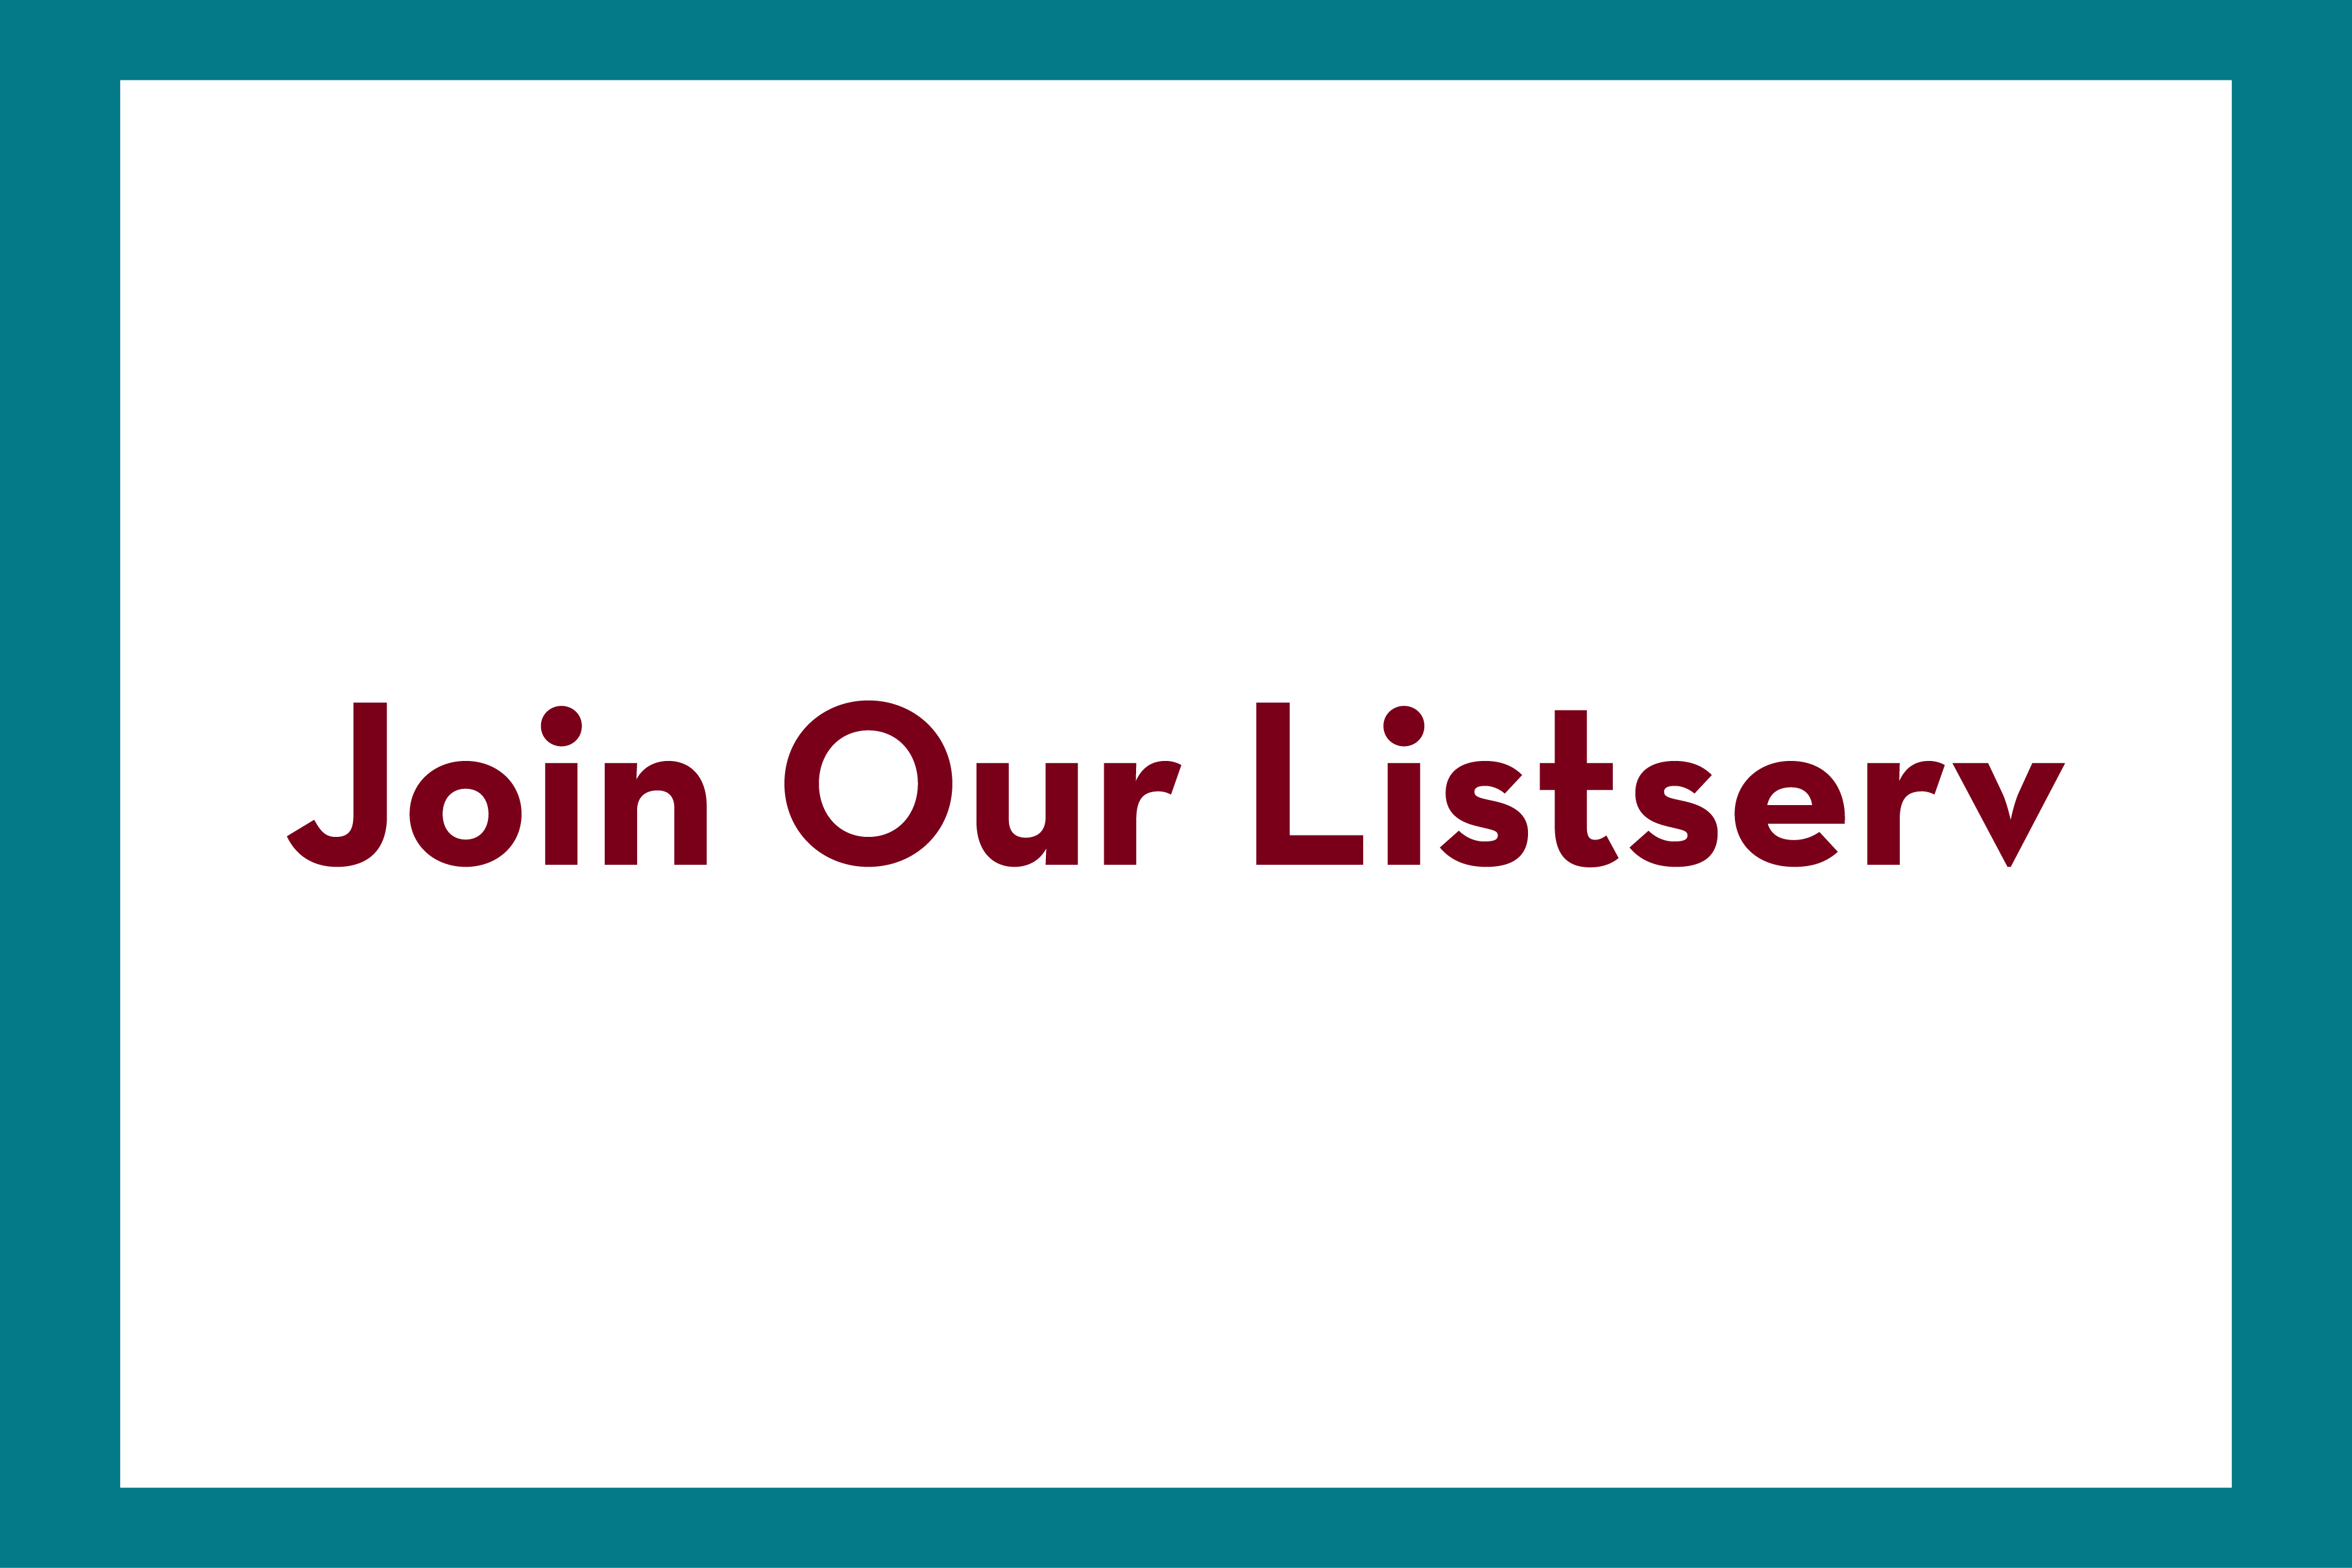 Join Our Listserv